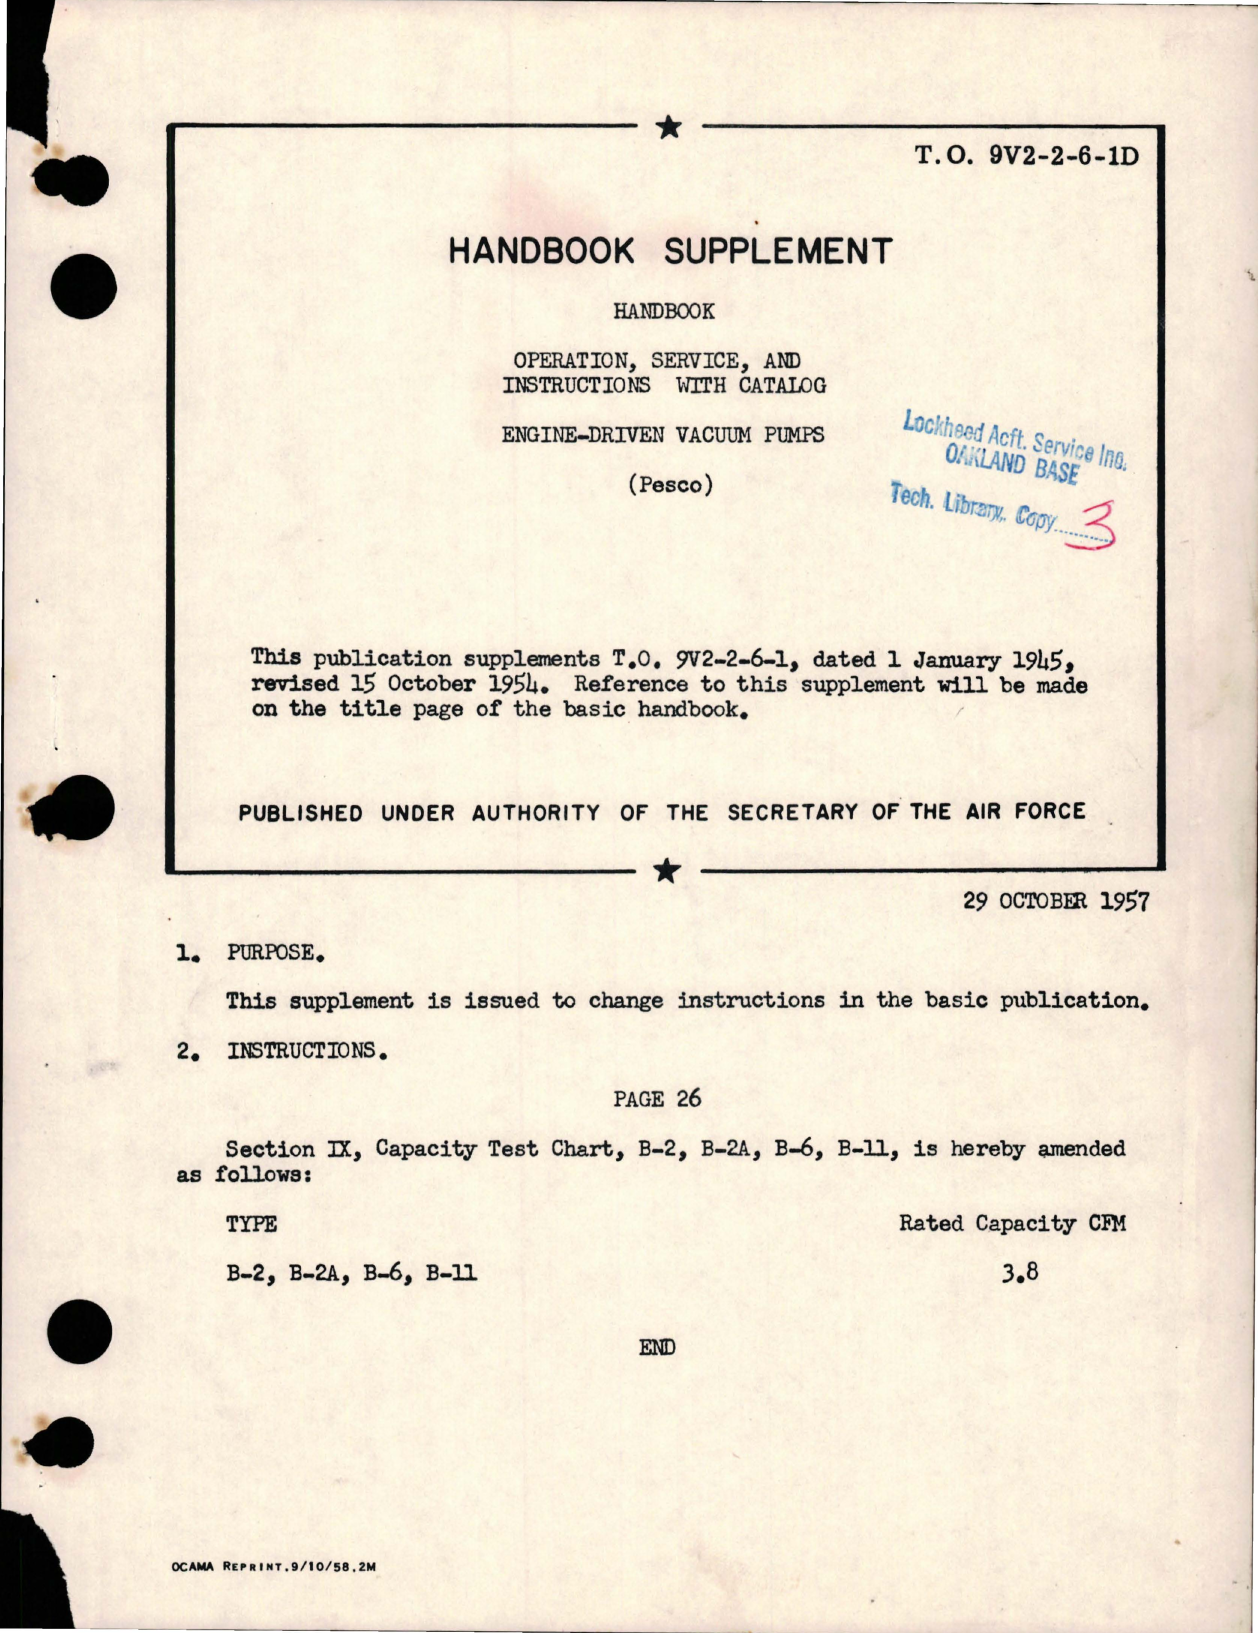 Sample page 1 from AirCorps Library document: Supplement to Operation, Service and Overhaul Instructions w Parts for Engine Driven Vacuum Pumps